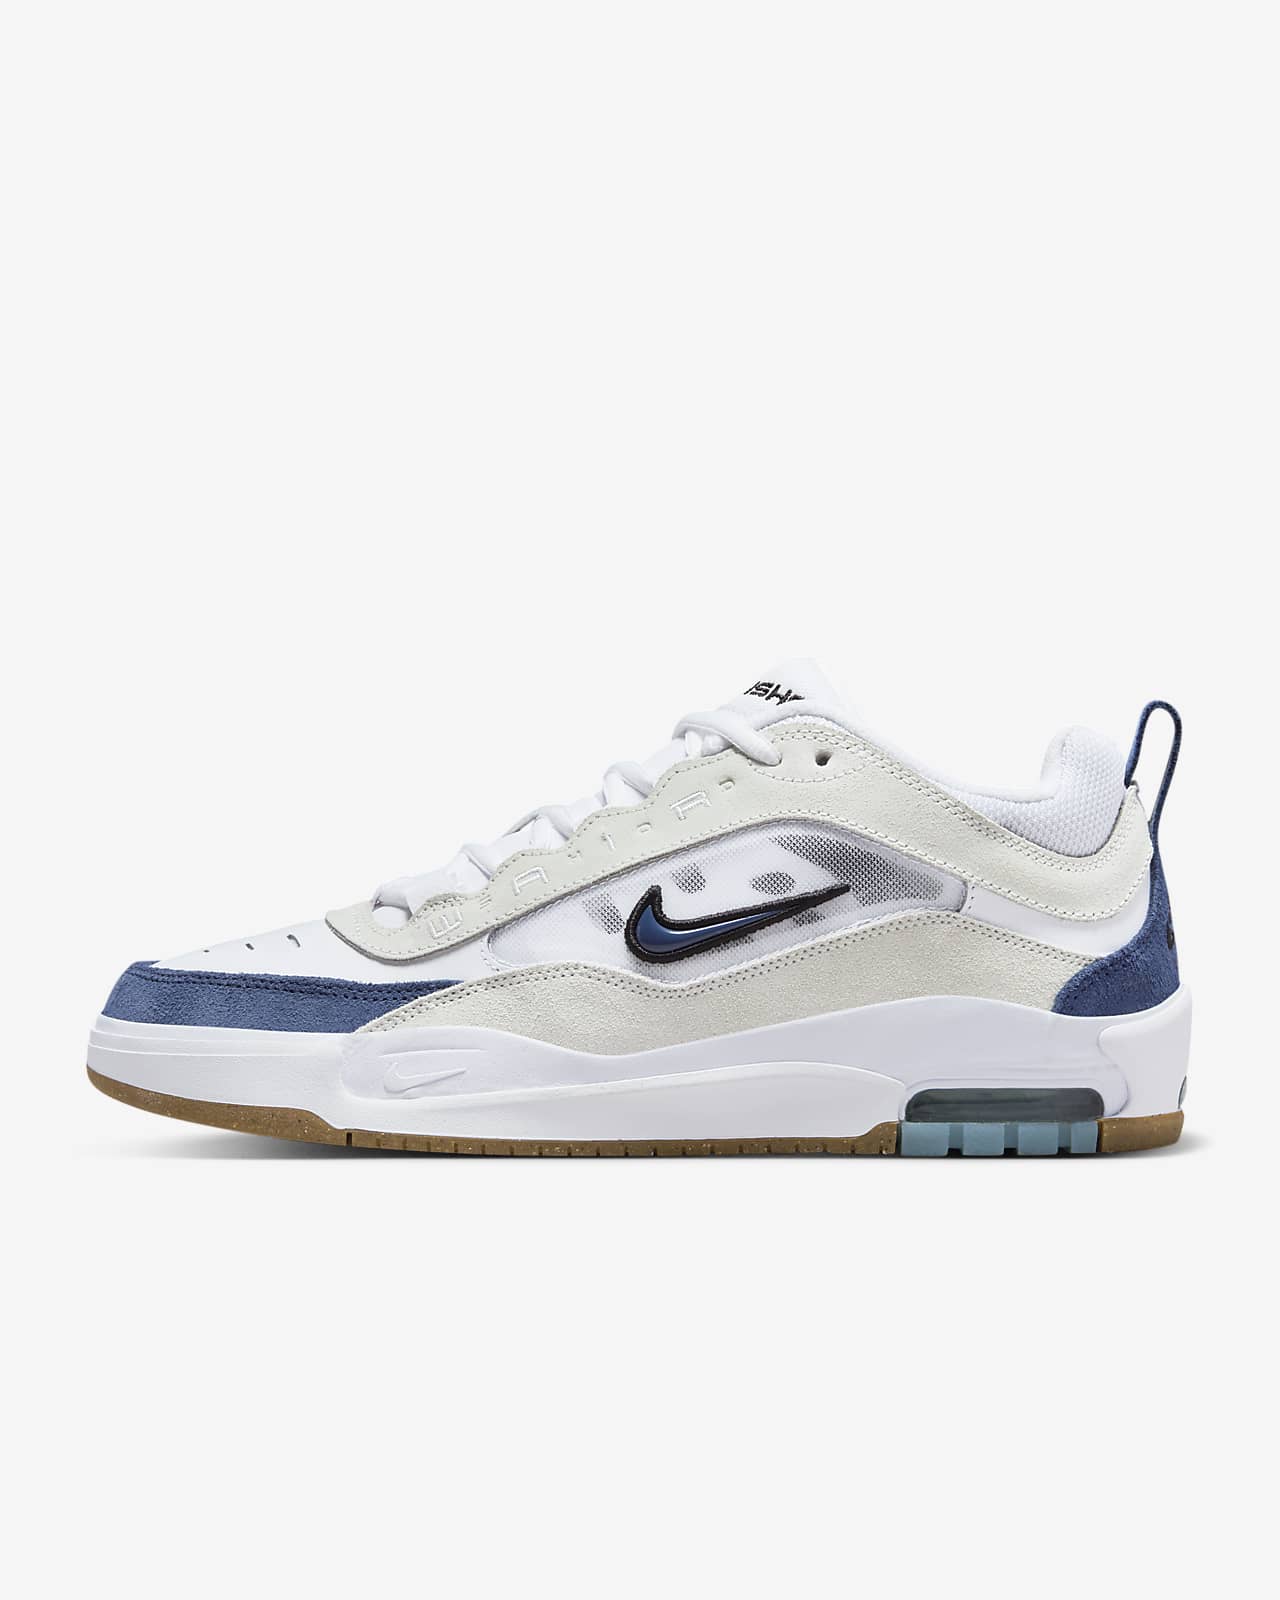 Chaussure Nike Air Max Ishod pour homme